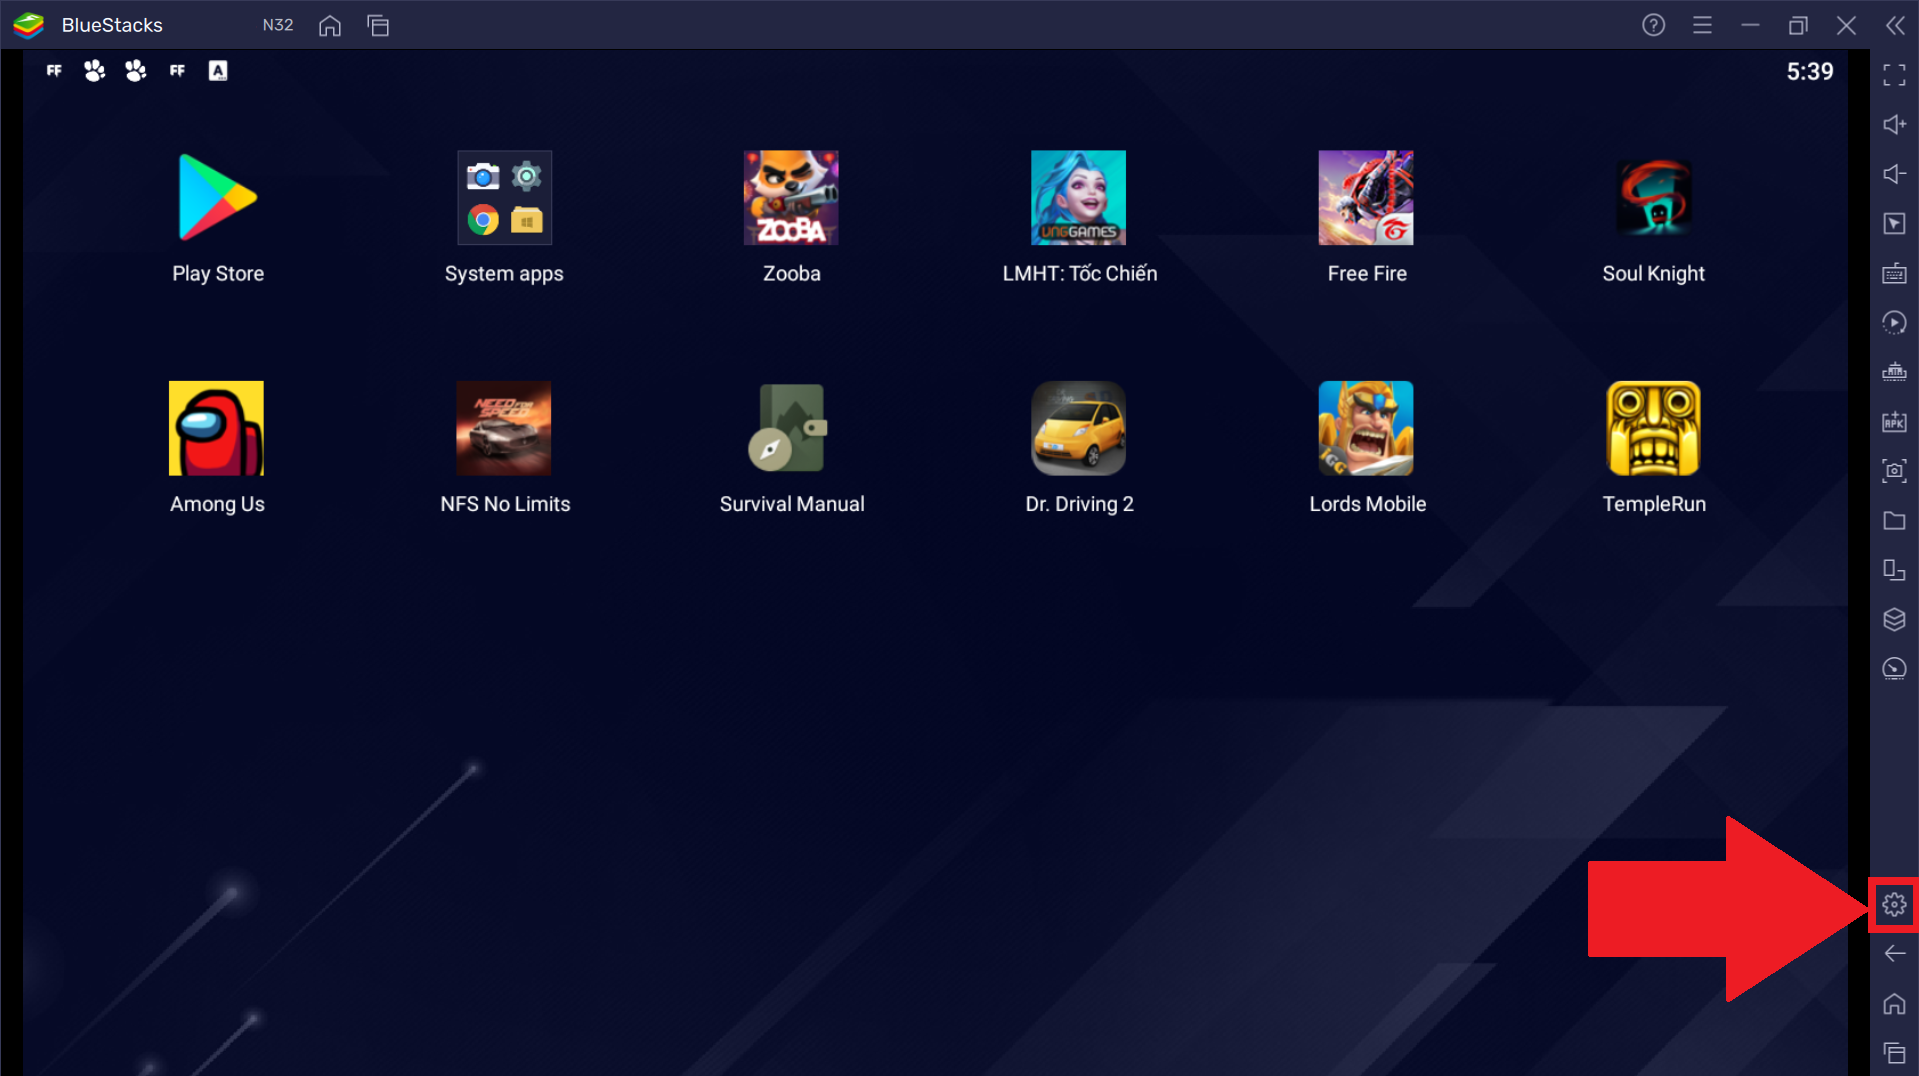 games in bluestacks only show a black screen